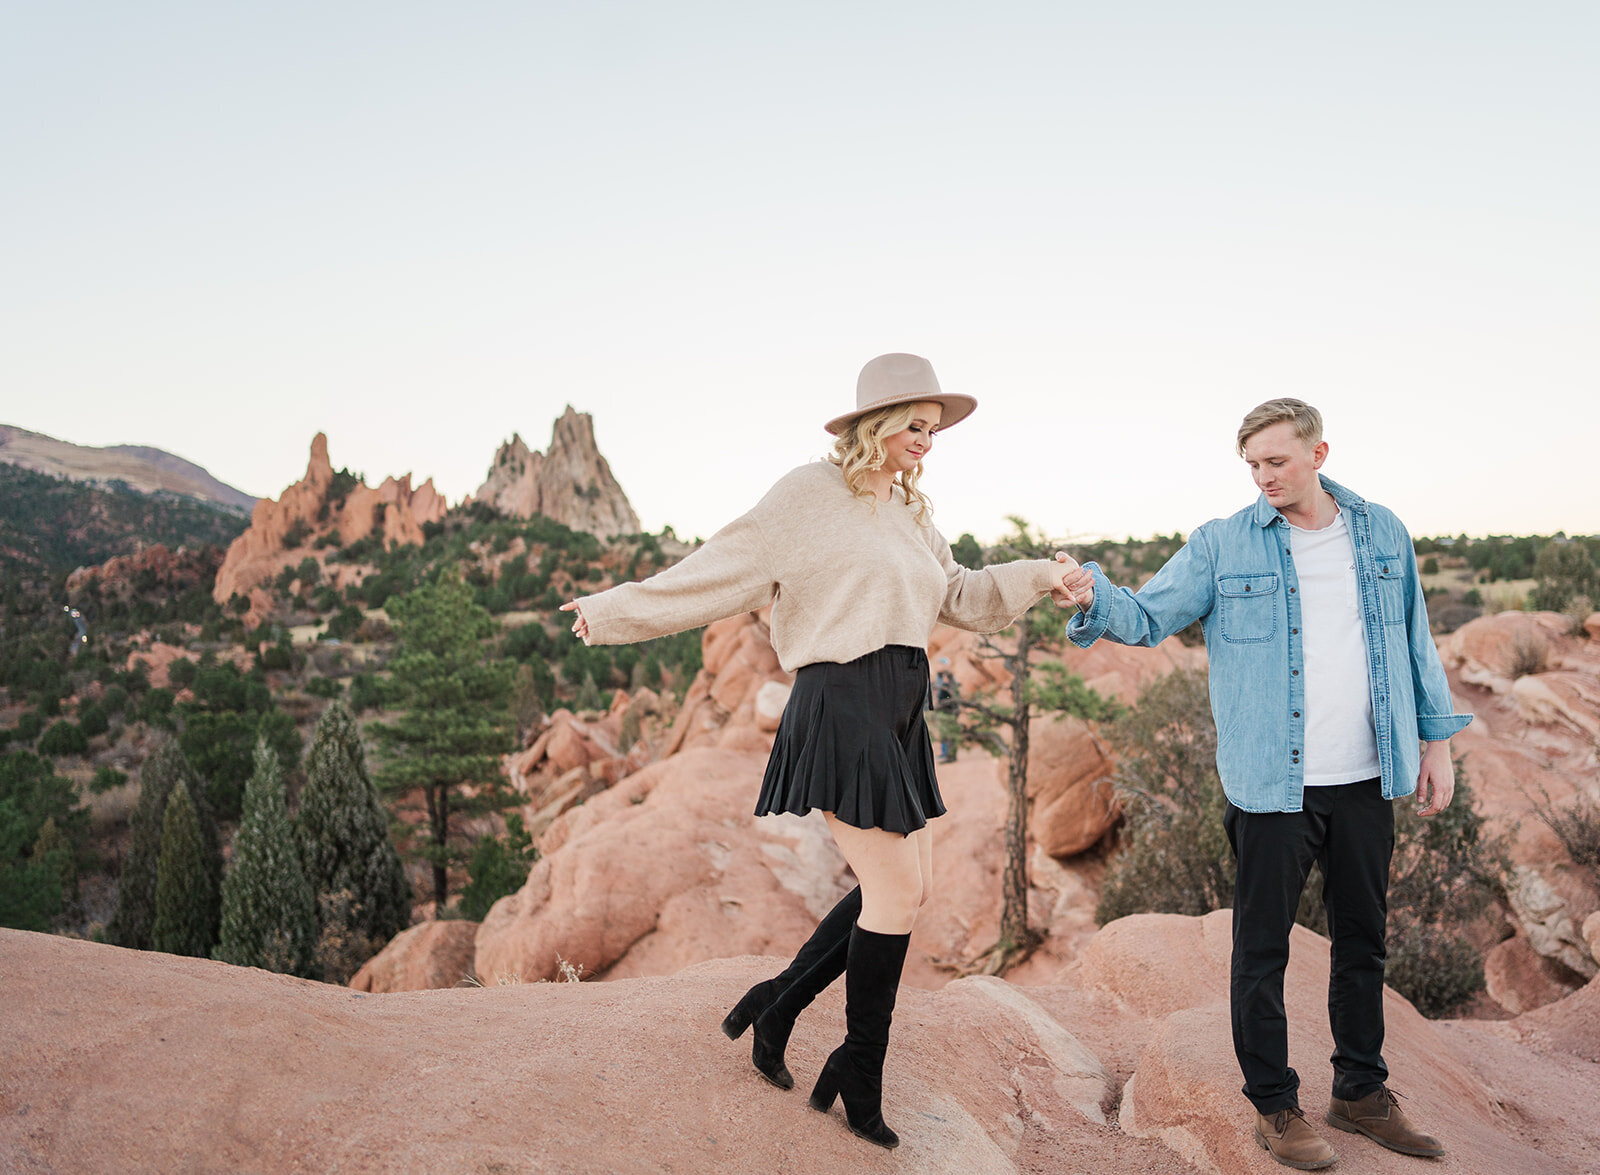 Take your engagement photos to new heights with an outdoor session featuring stunning mountain views. Sam Immer Photography will create a personalized experience that showcases your unique connection.